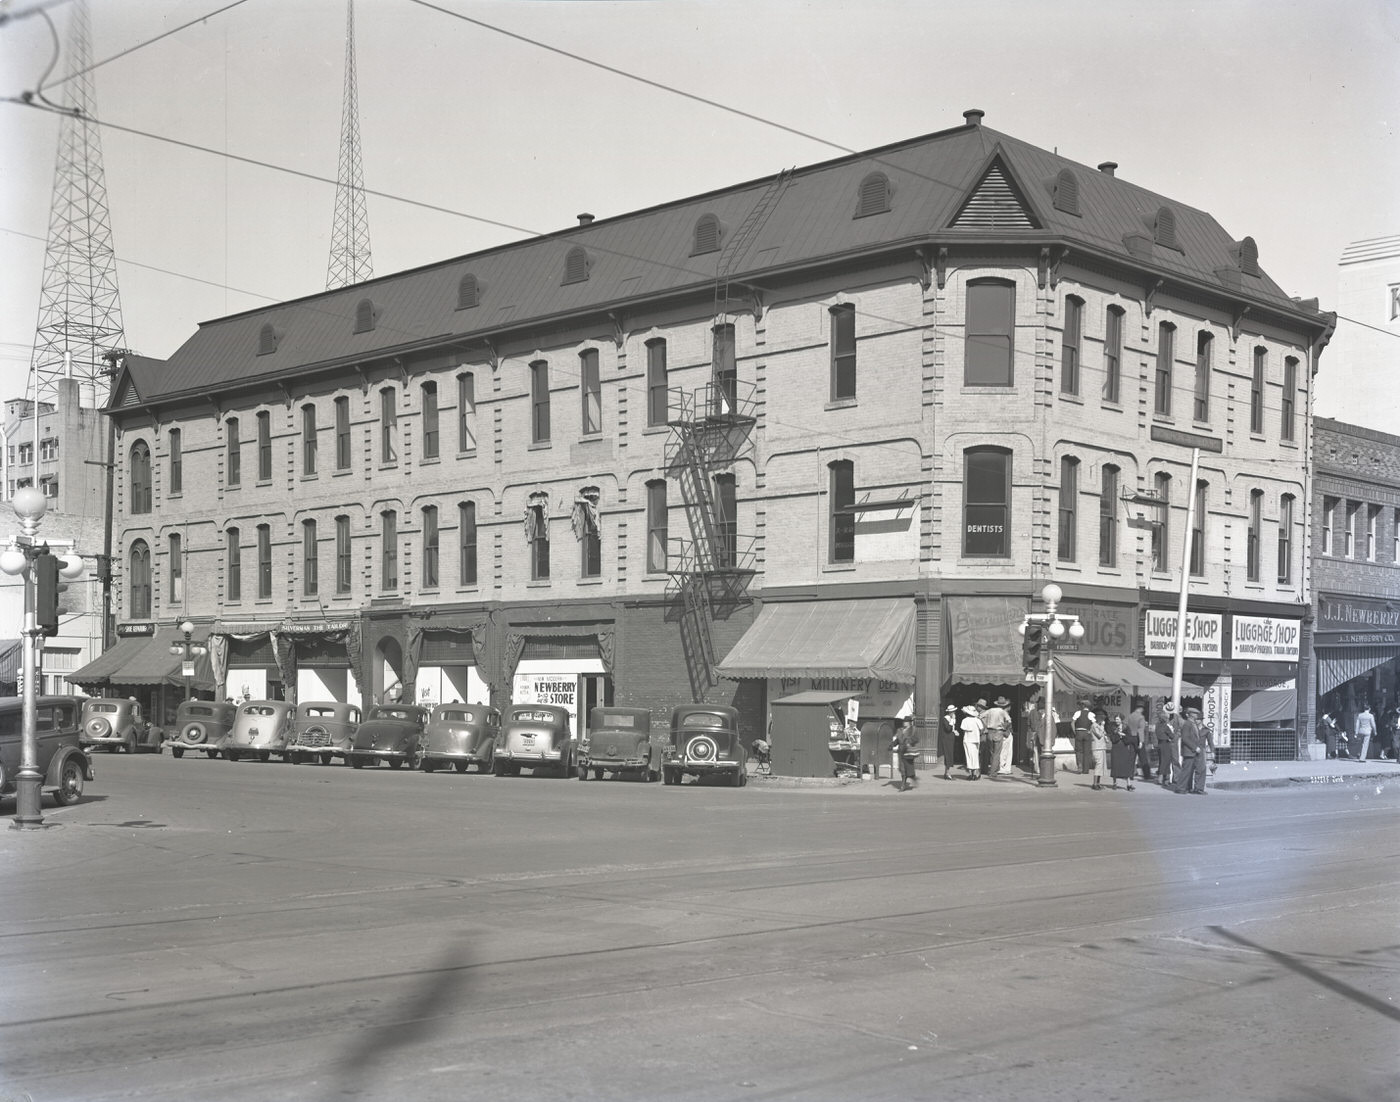 Monihan Building Exterior, 1930s. This building was located at First Ave. and Washington St. in Phoenix.